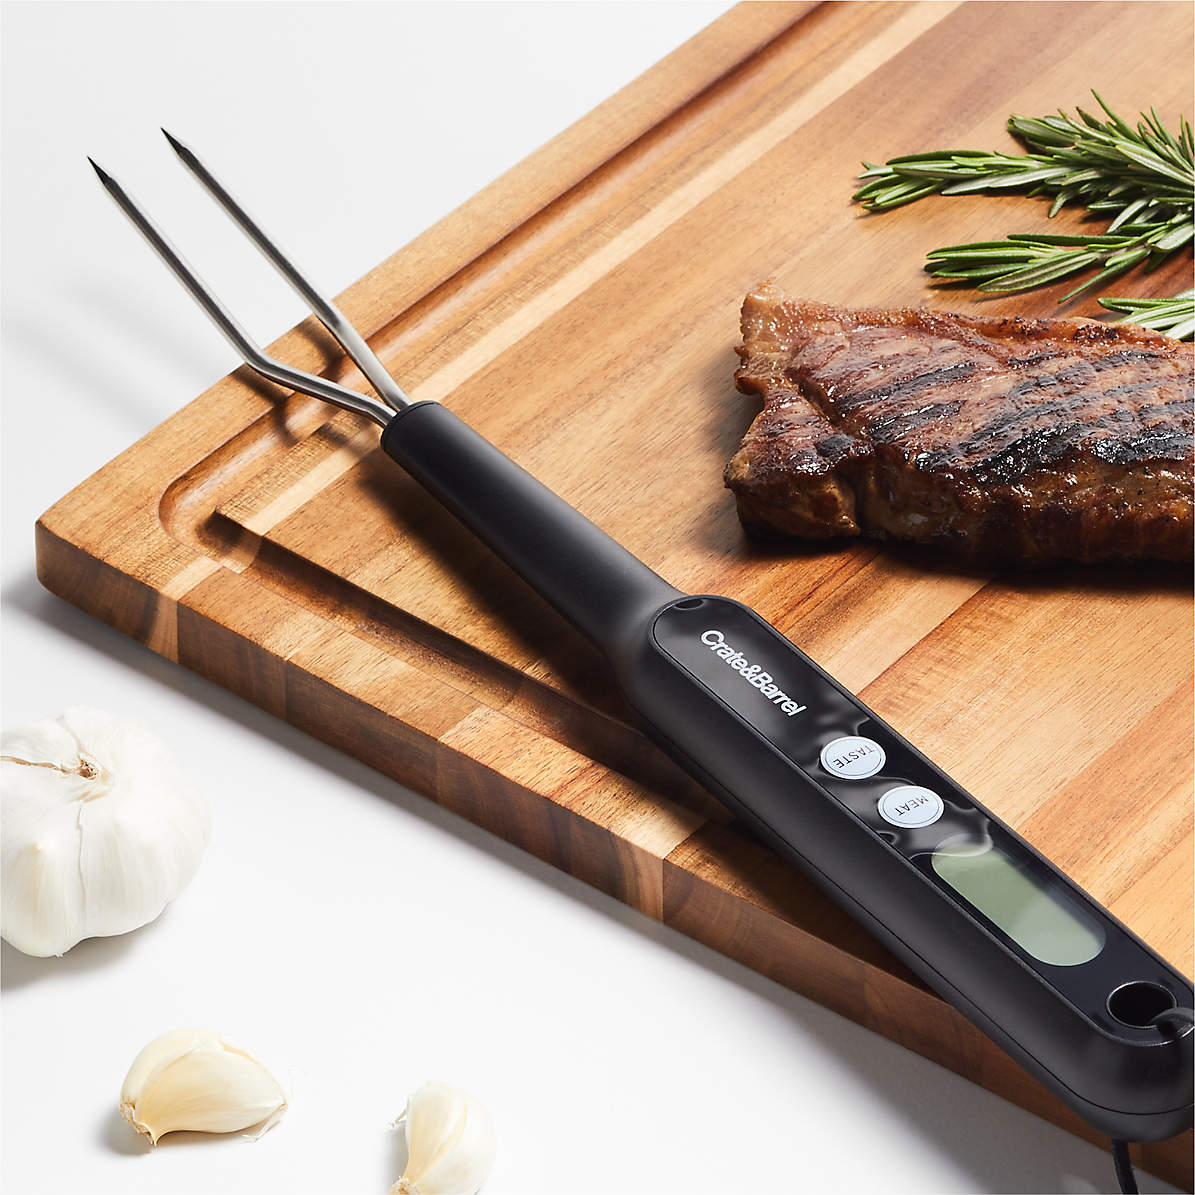 Barbecue fork with thermometer - Westmark Shop